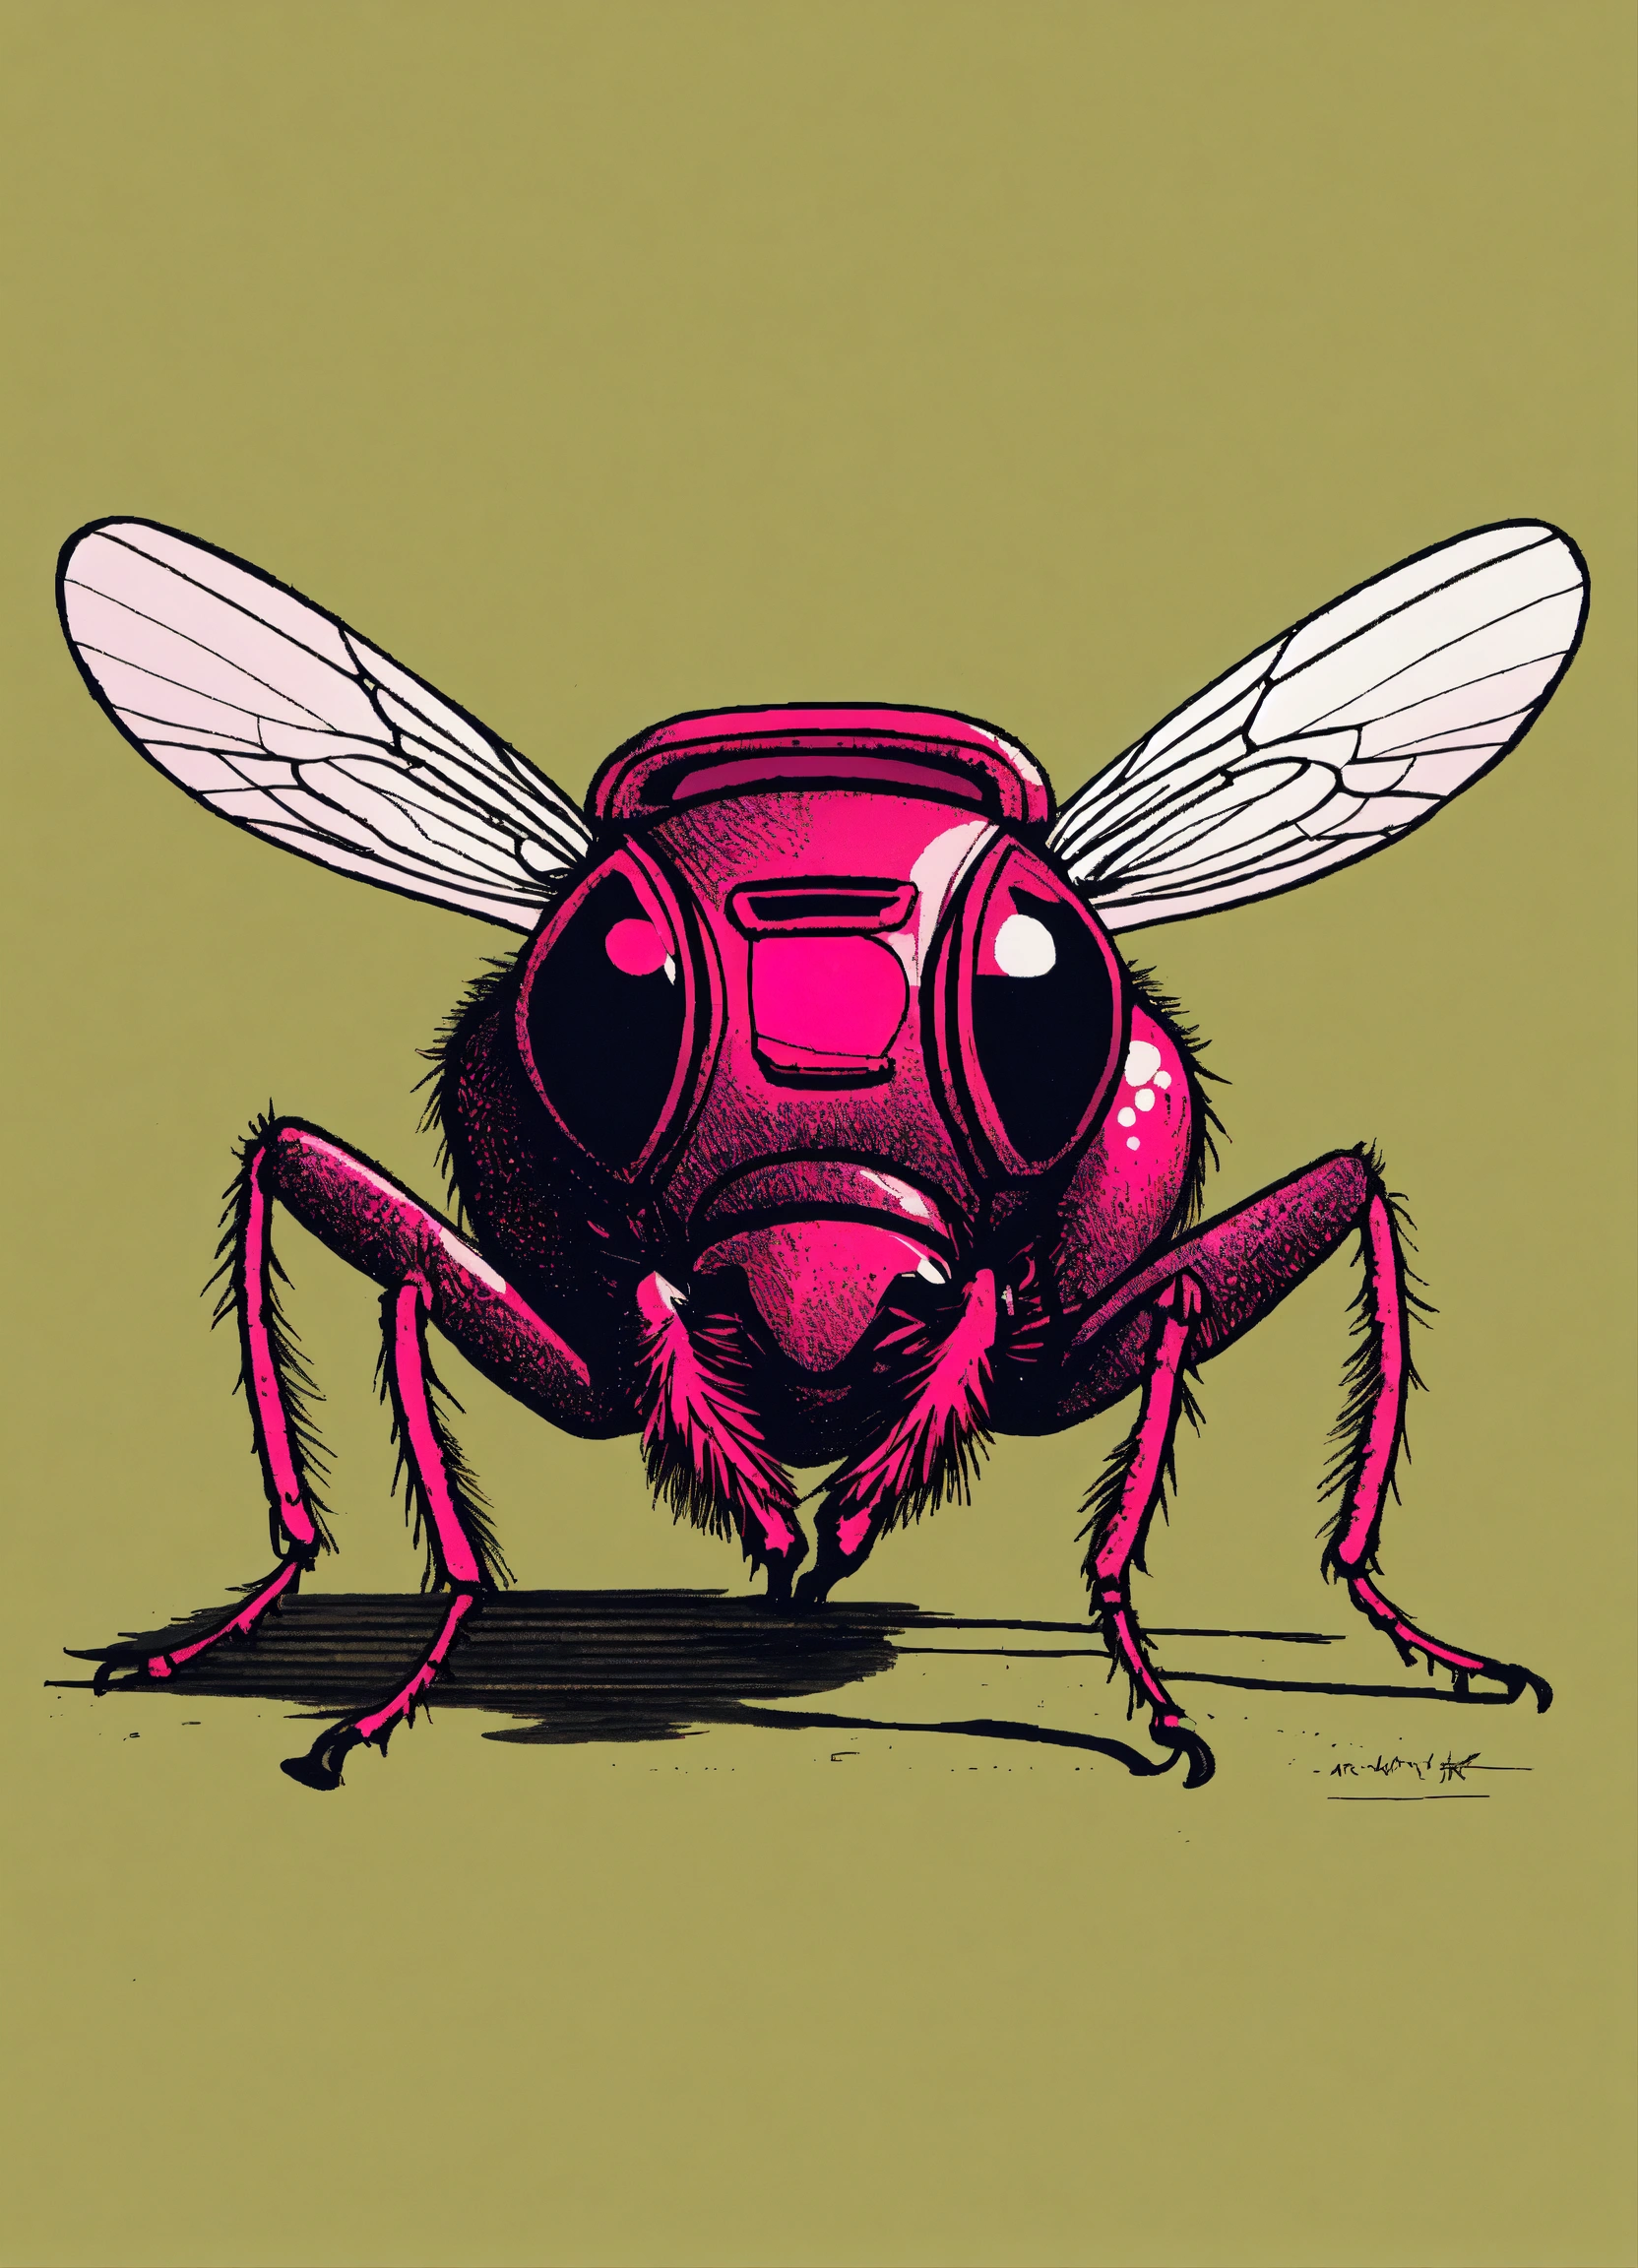 Lexica - A fly with sunglasses and a boombox on its leg, in the style ...